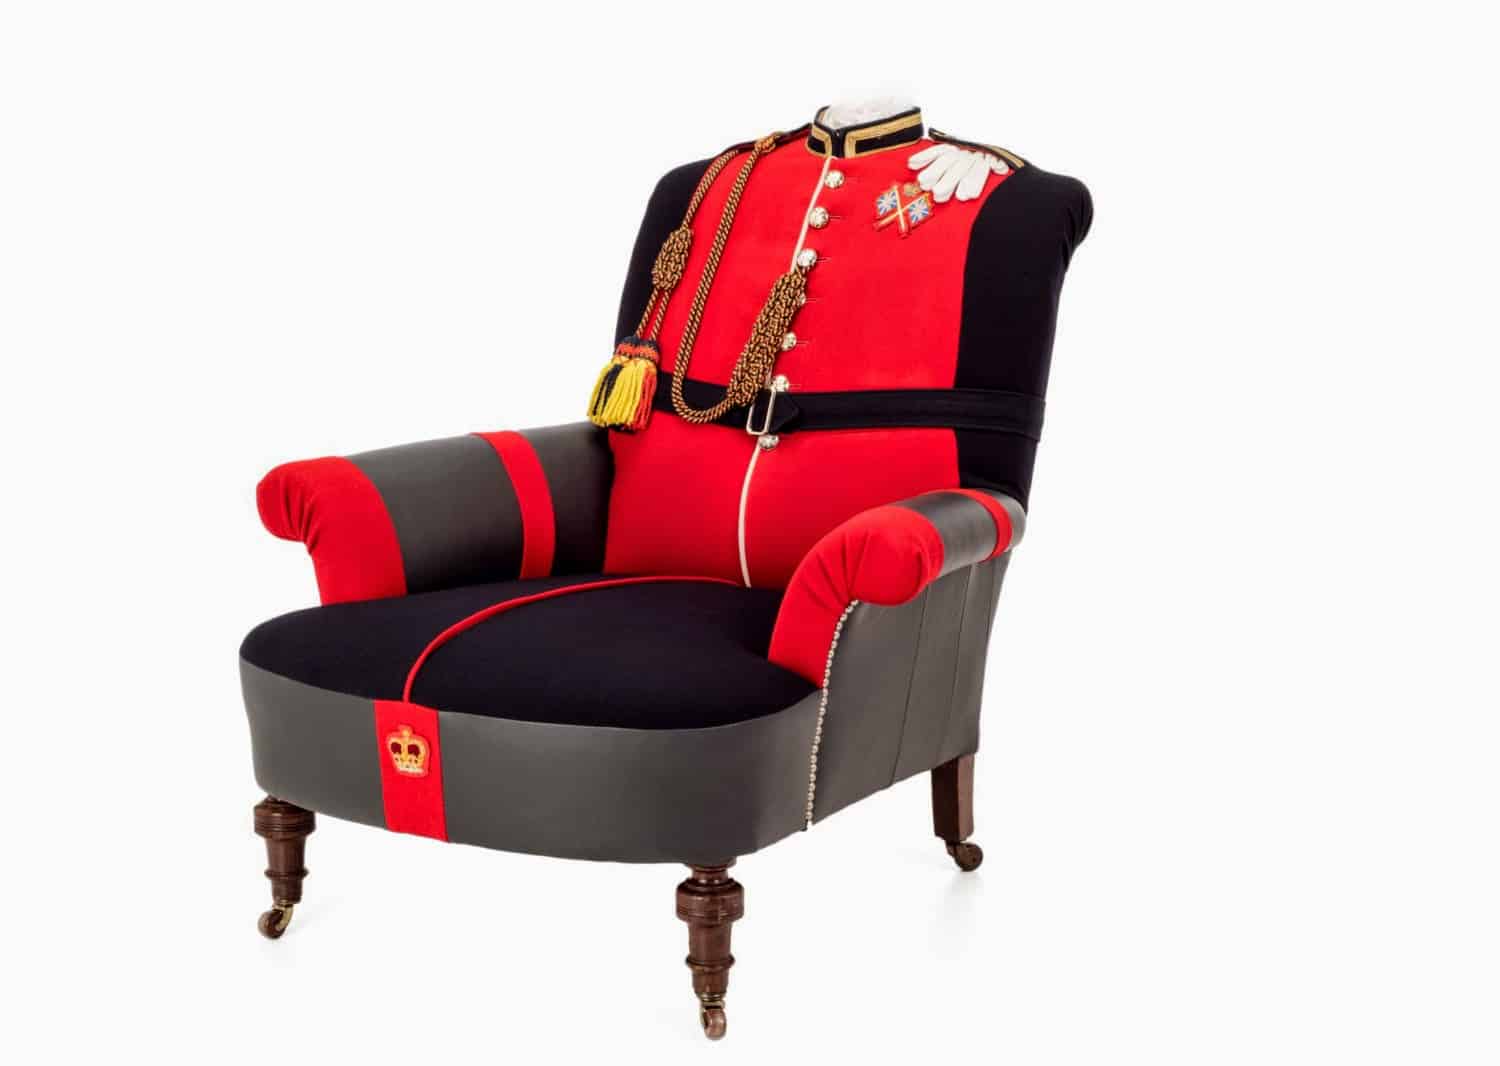 recycled-furniture-uniform-chair-rescued-red.jpg